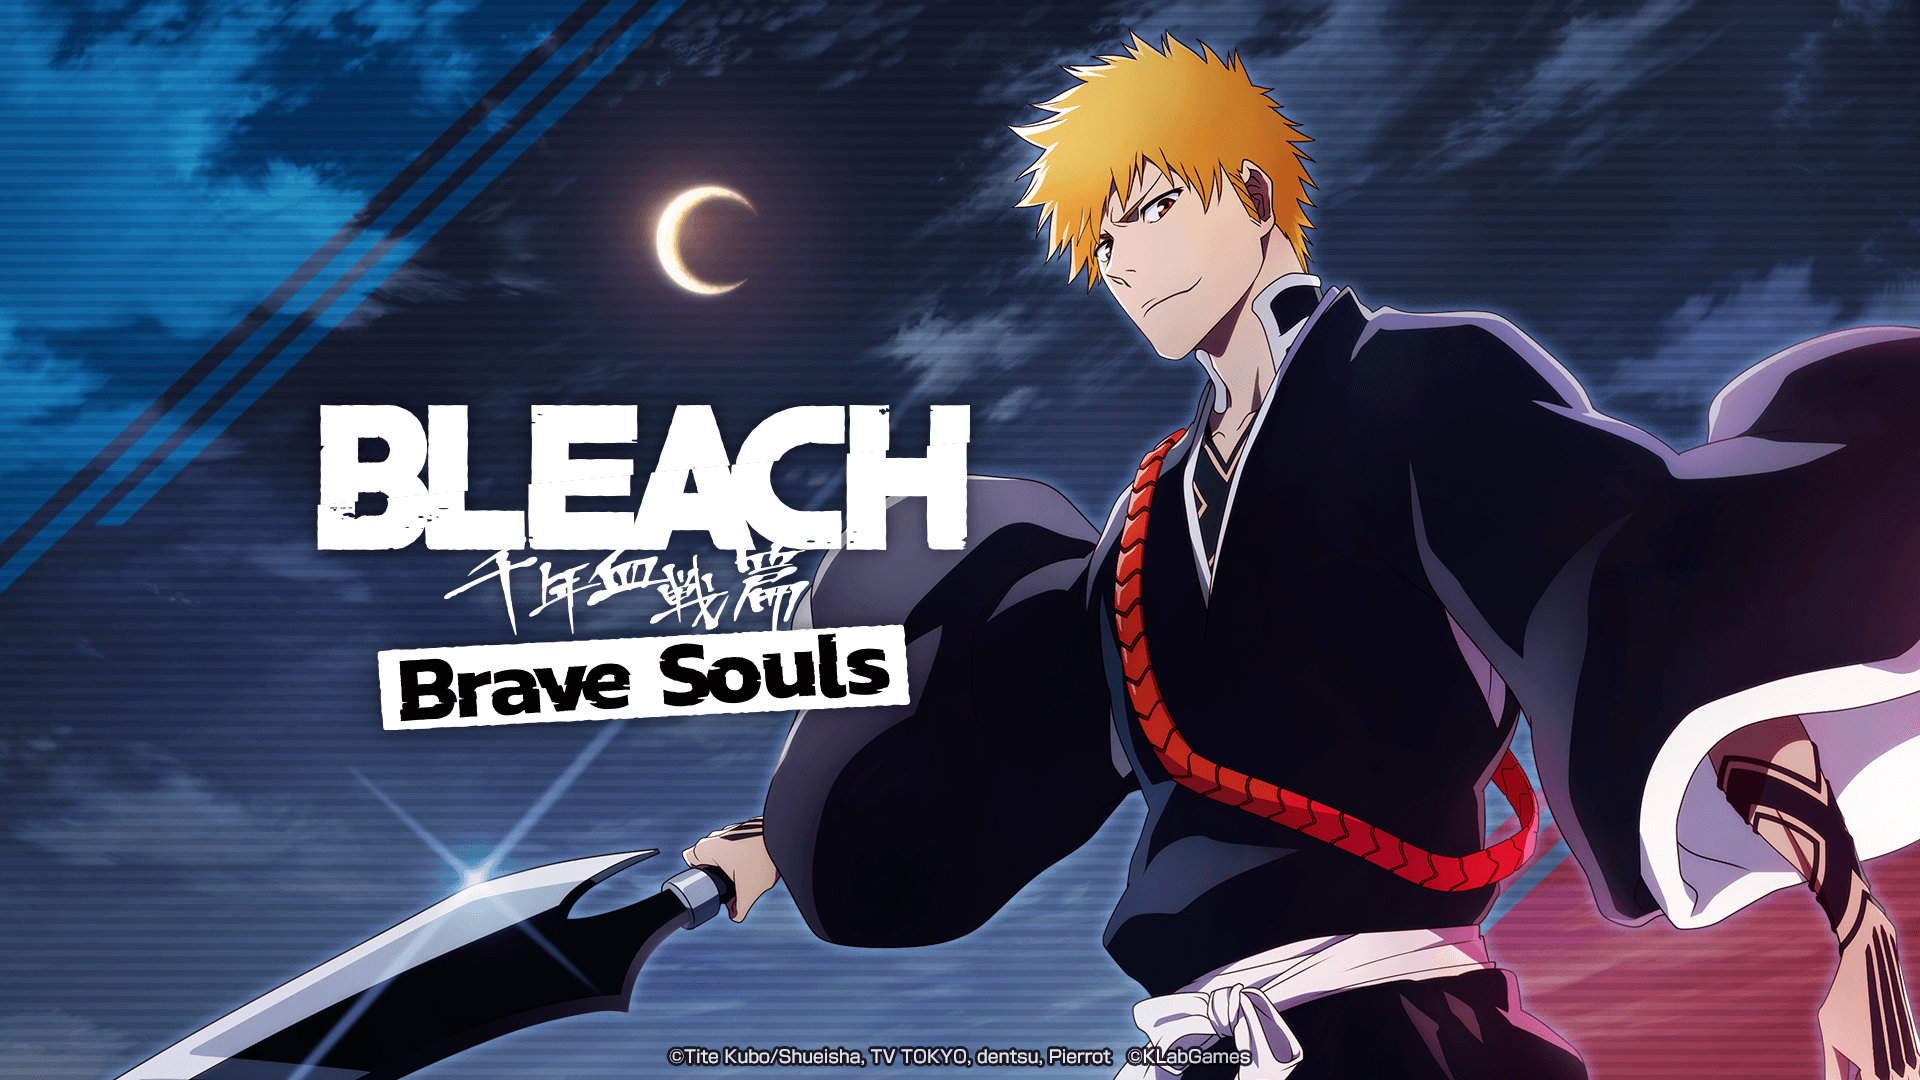 GAME CHANGING CHARACTERS?! NEW TYBW ANIME ICHIGO, CHAD AND URYU! Bleach:  Brave Souls! 